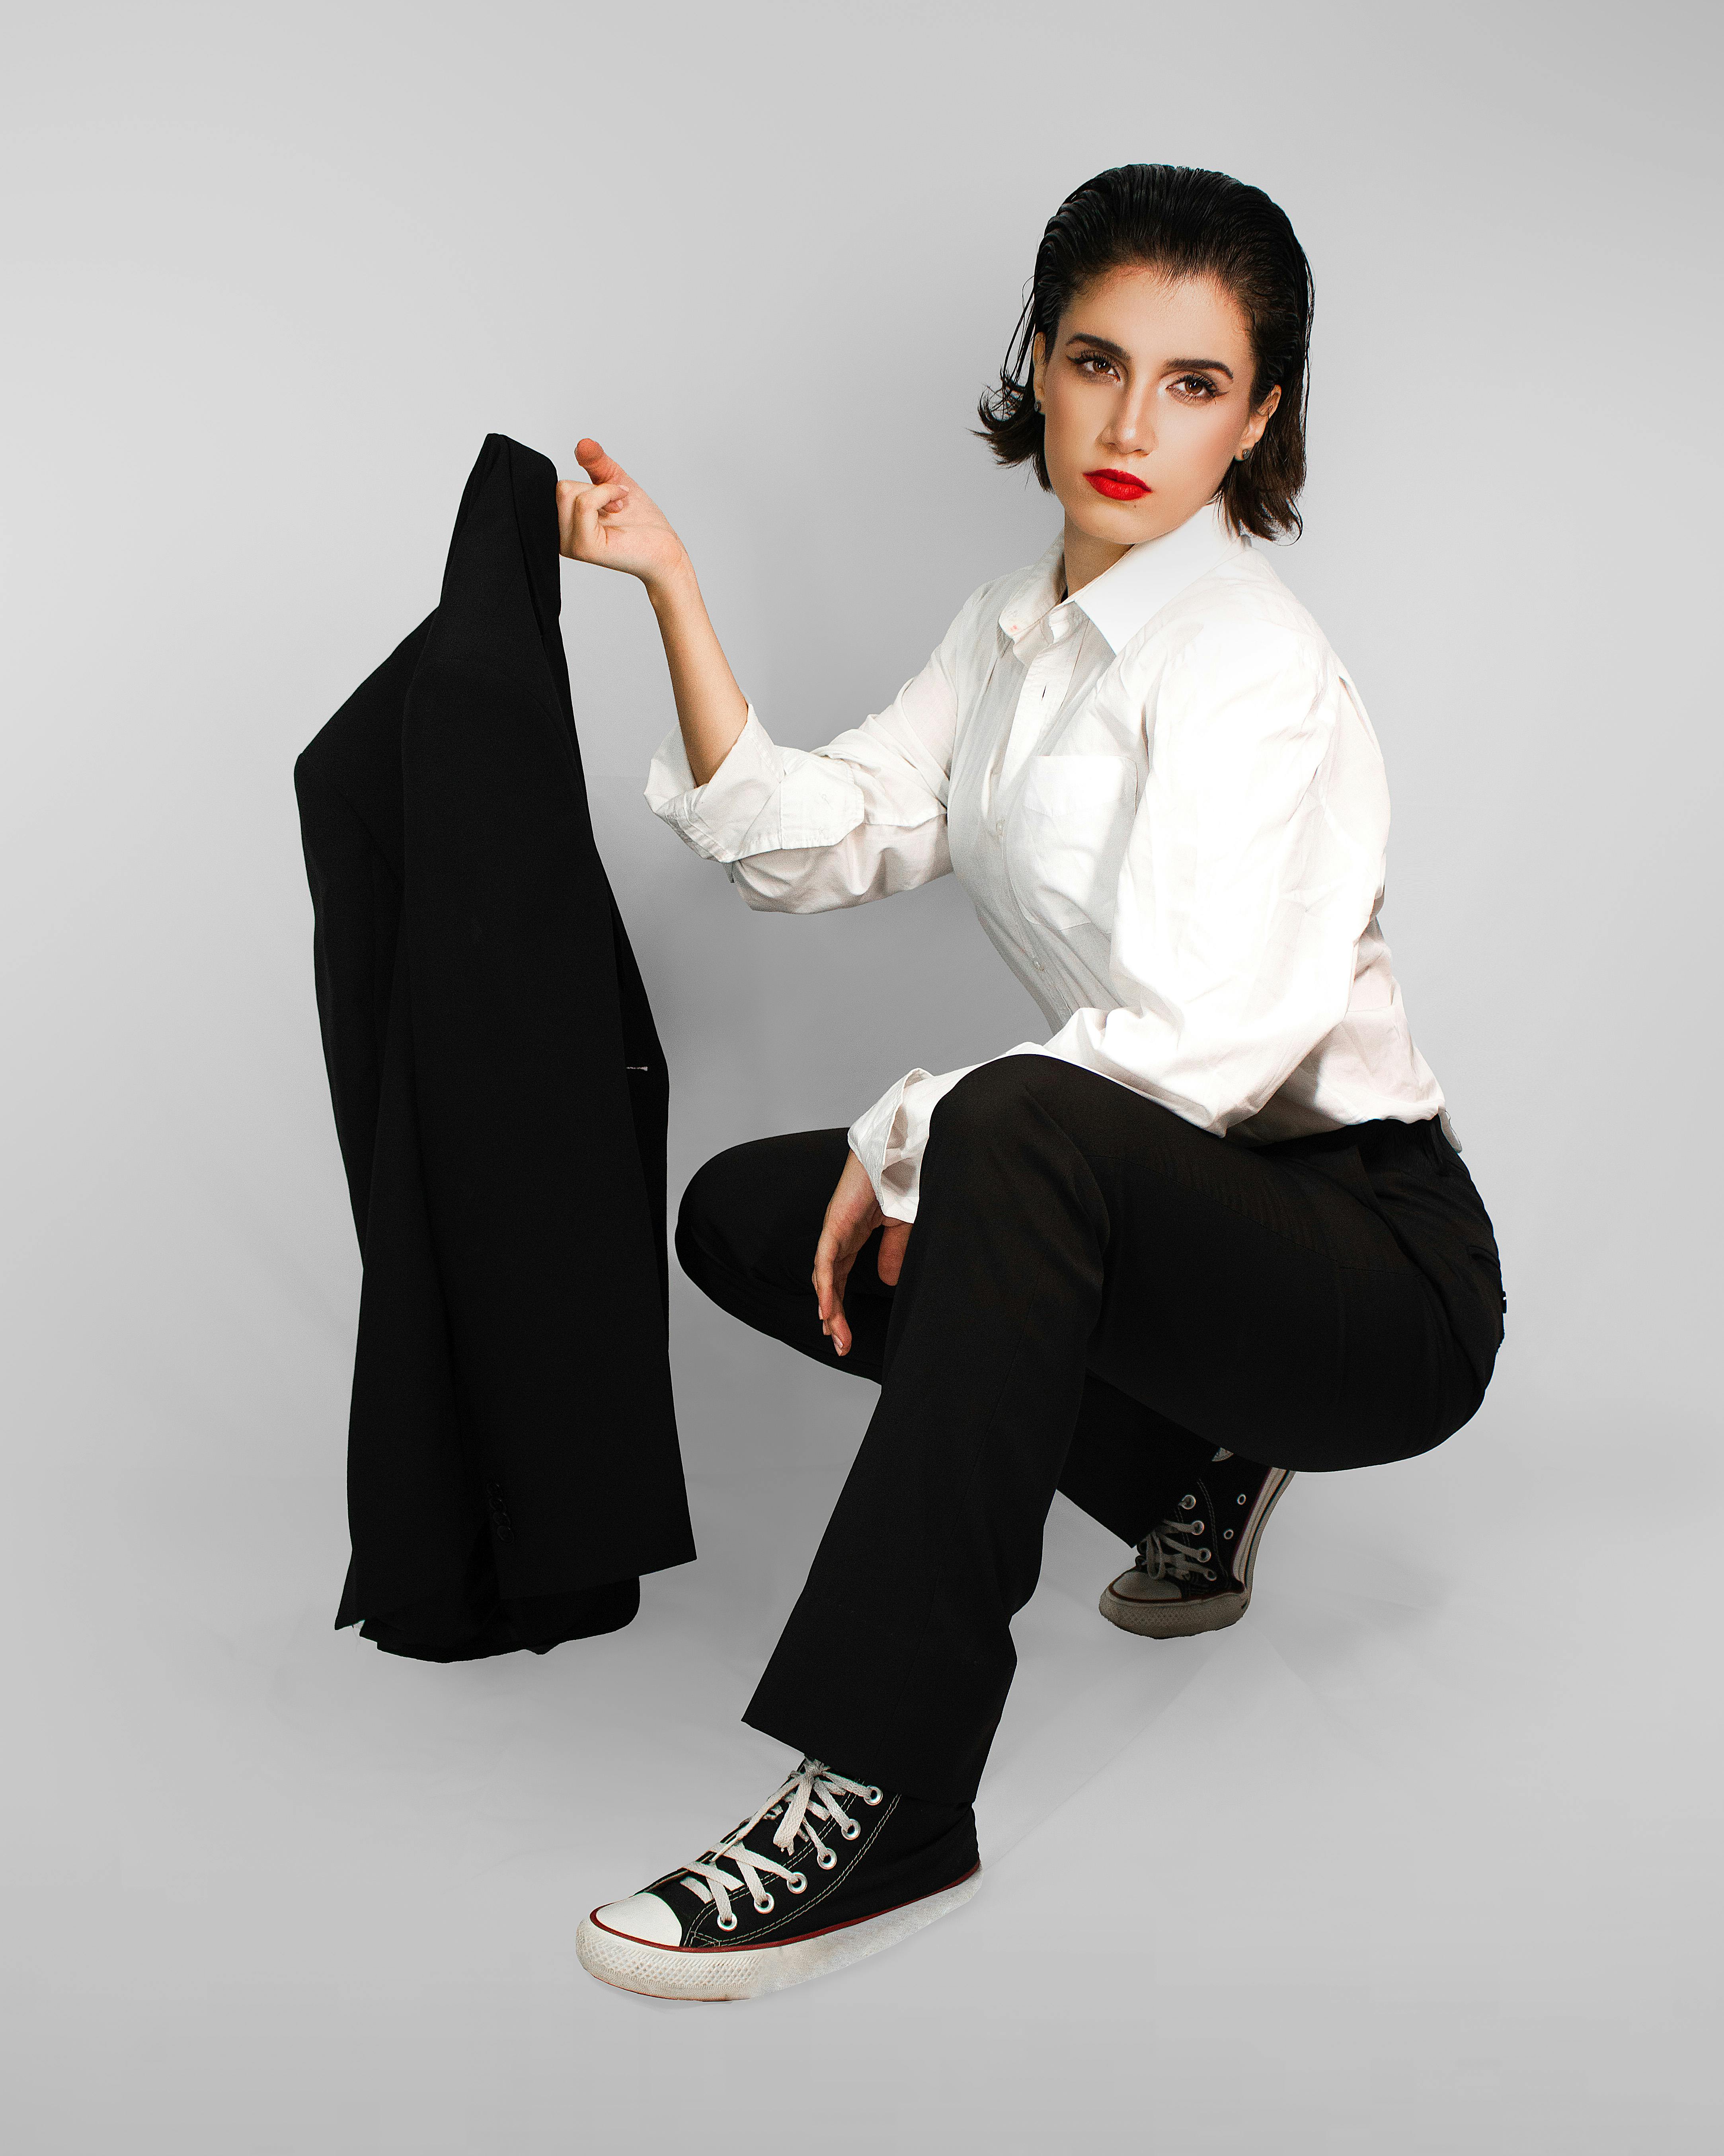 Summer Work Outfit Ideas Black Pants an Interesting White Shirt and Black  Sandals  Glamour